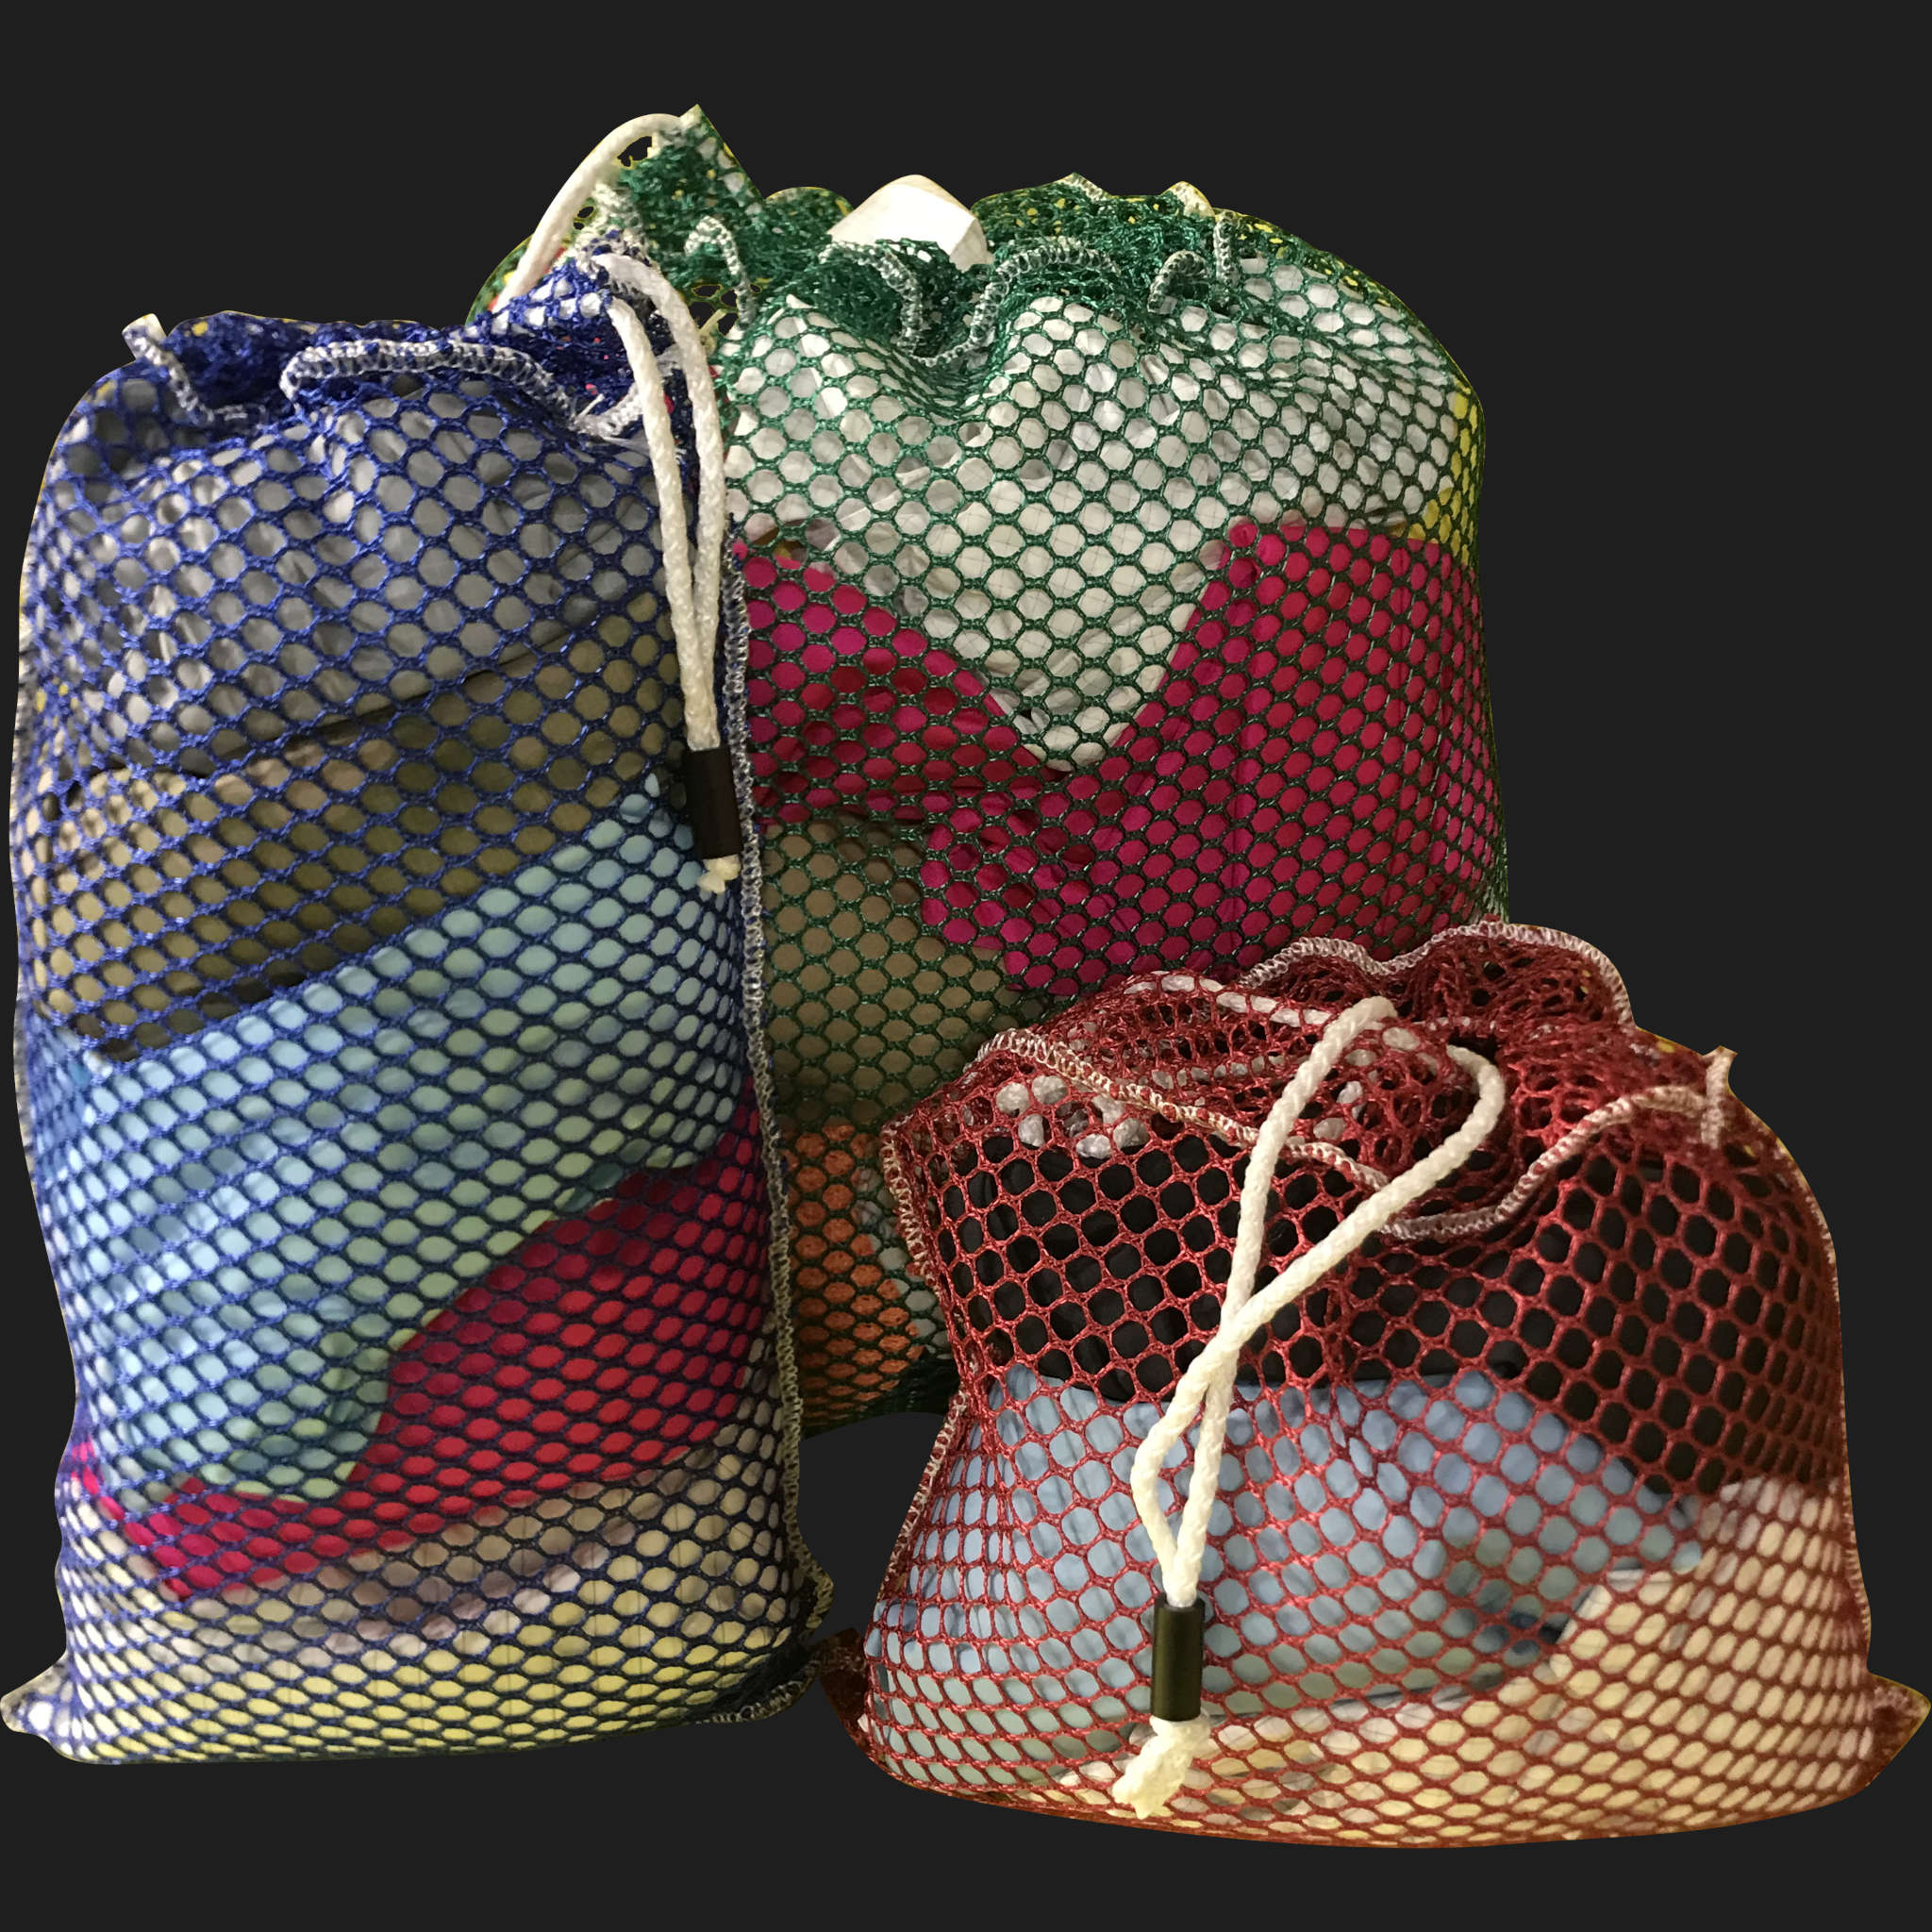 14" x 40" Customized Mesh-Net-Laundry Bags Heavy Duty with Cord and barrellock closure